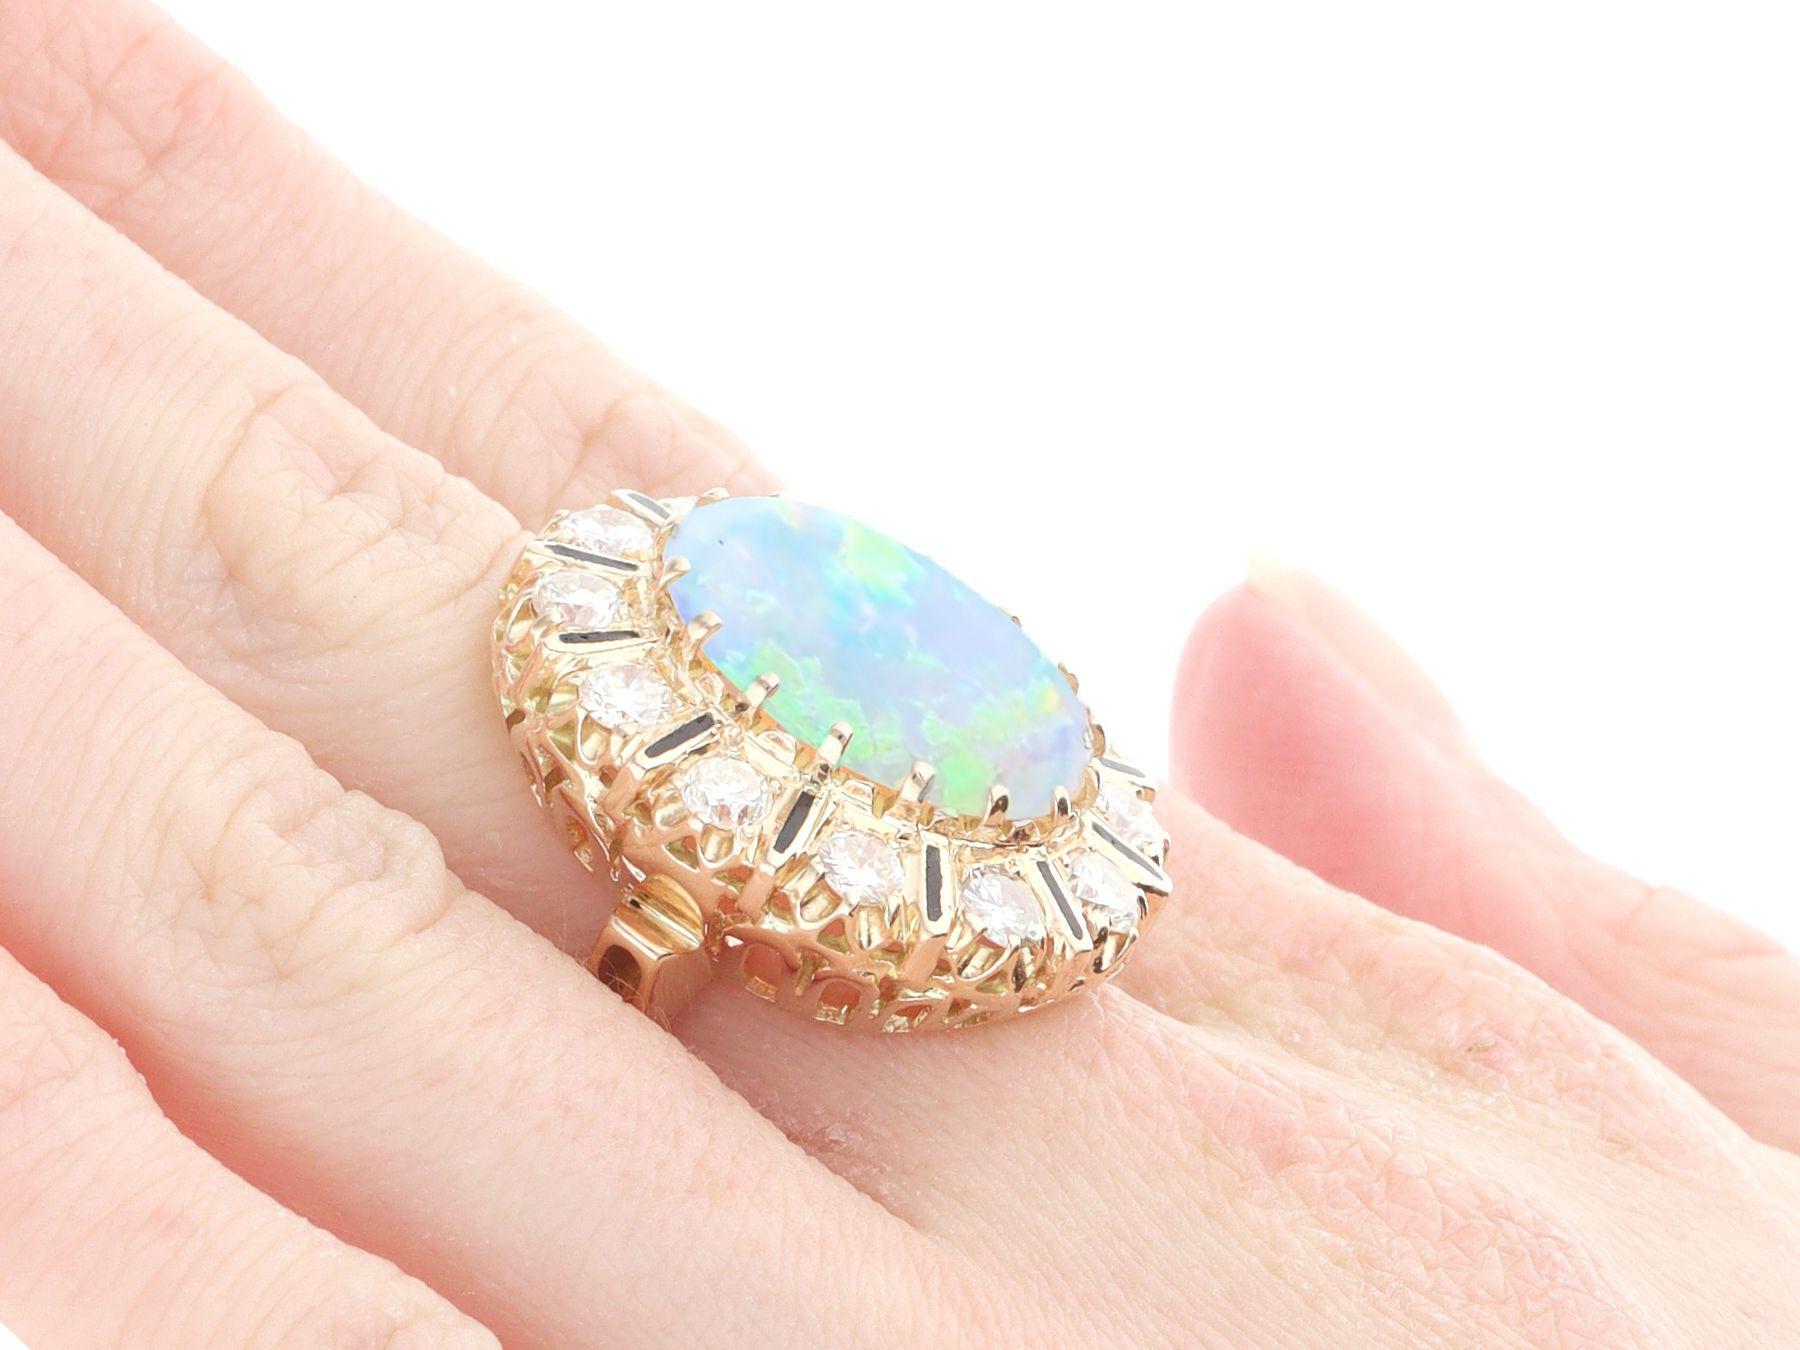 Vintage 5.50 carat Opal and 1.92carat Diamond Cocktail Ring In Excellent Condition For Sale In Jesmond, Newcastle Upon Tyne